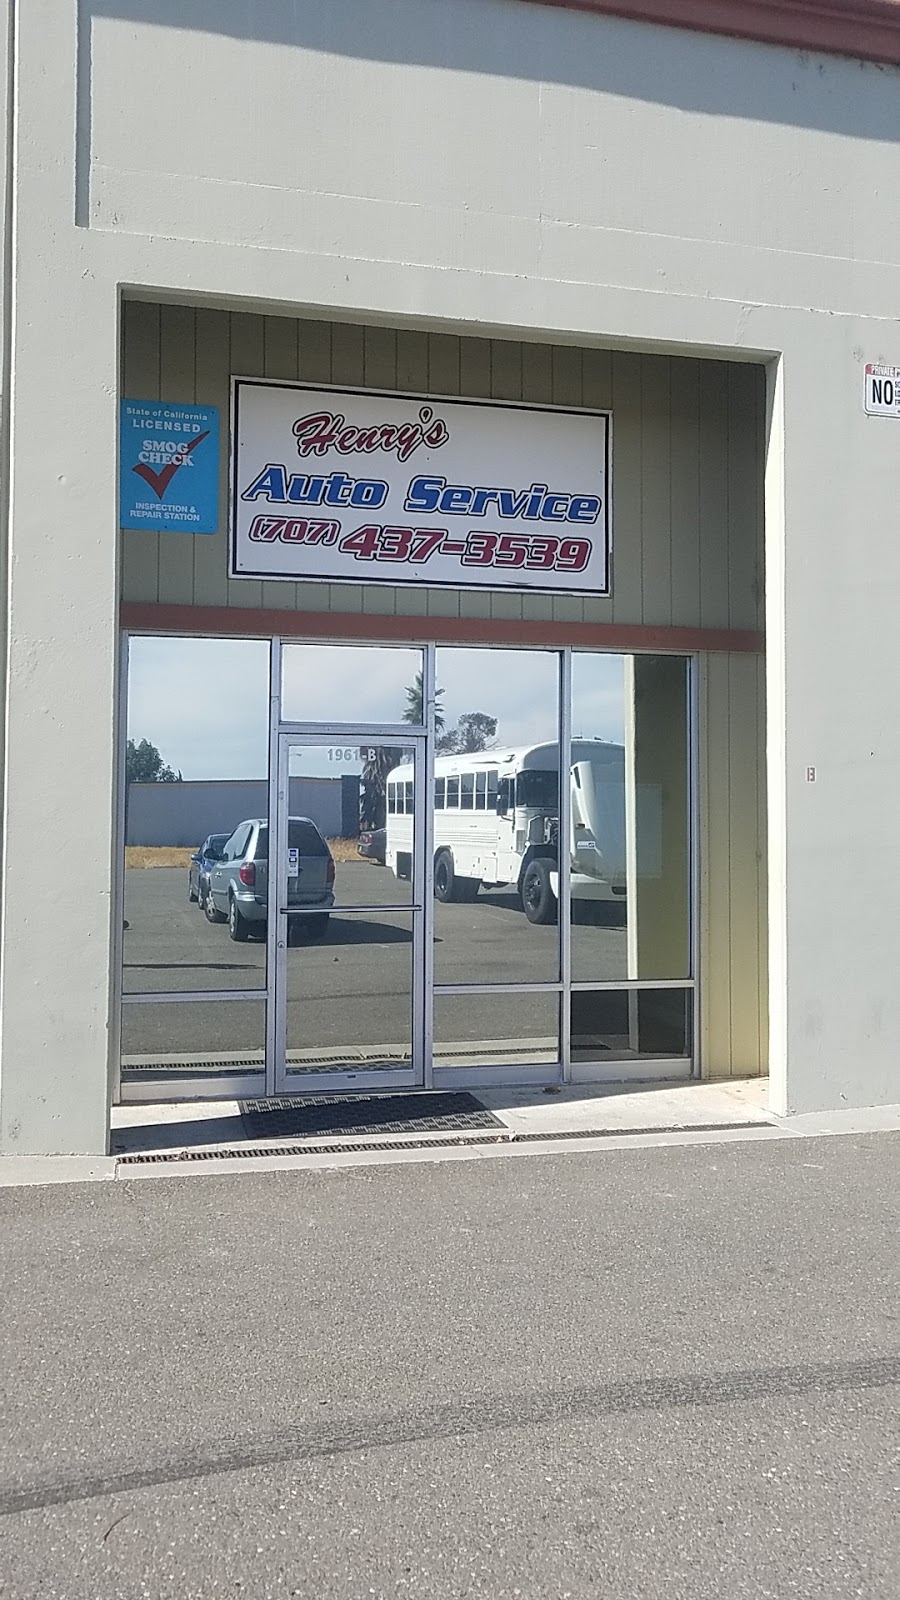 Henrys Auto Services | 1961 Walters Ct ste b, Fairfield, CA 94533 | Phone: (707) 437-3539